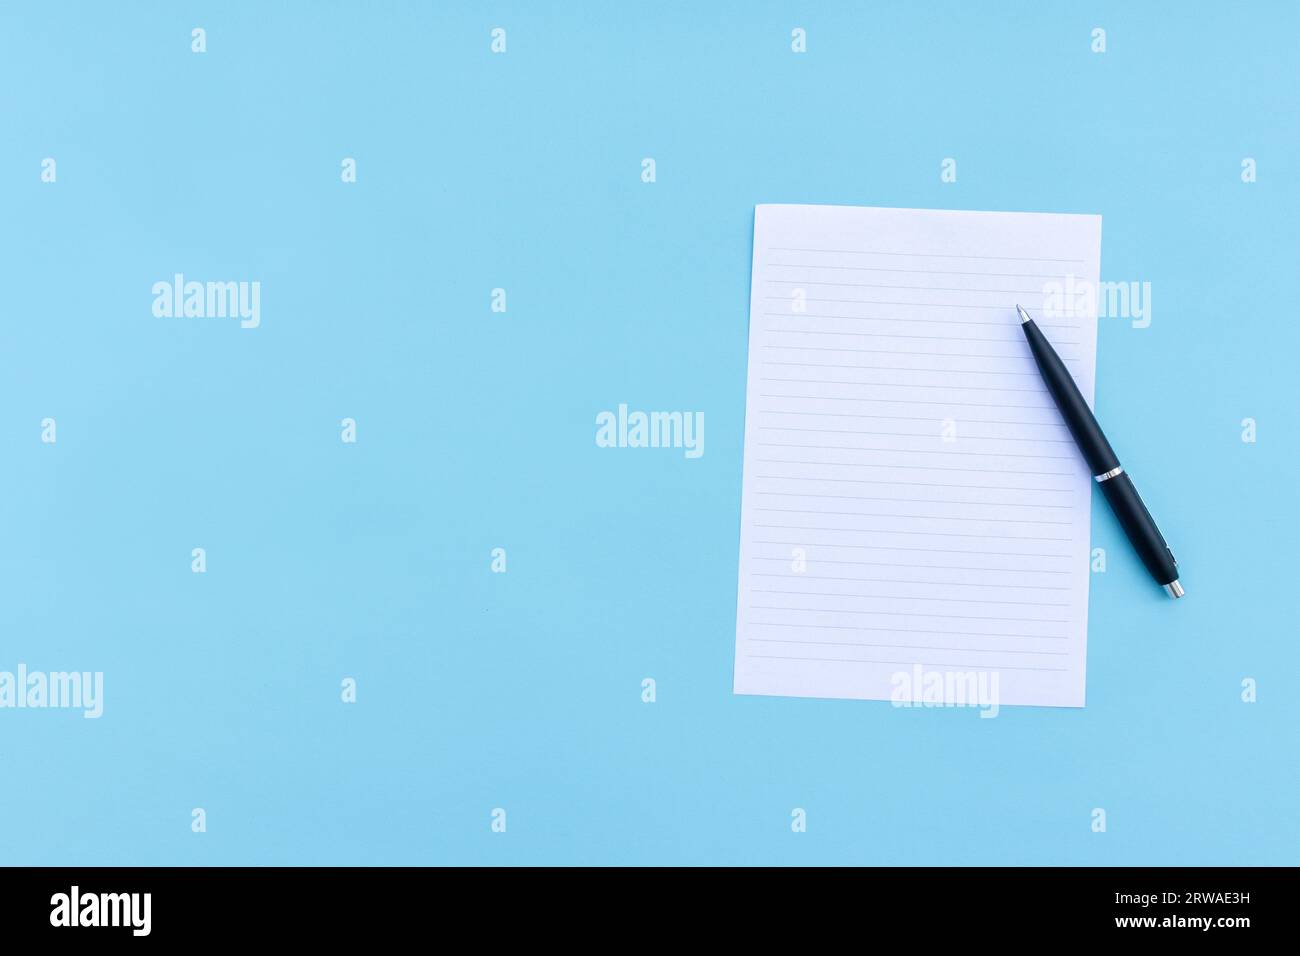 Blank white paper and pen isolated on blue background. After some edits. Stock Photo